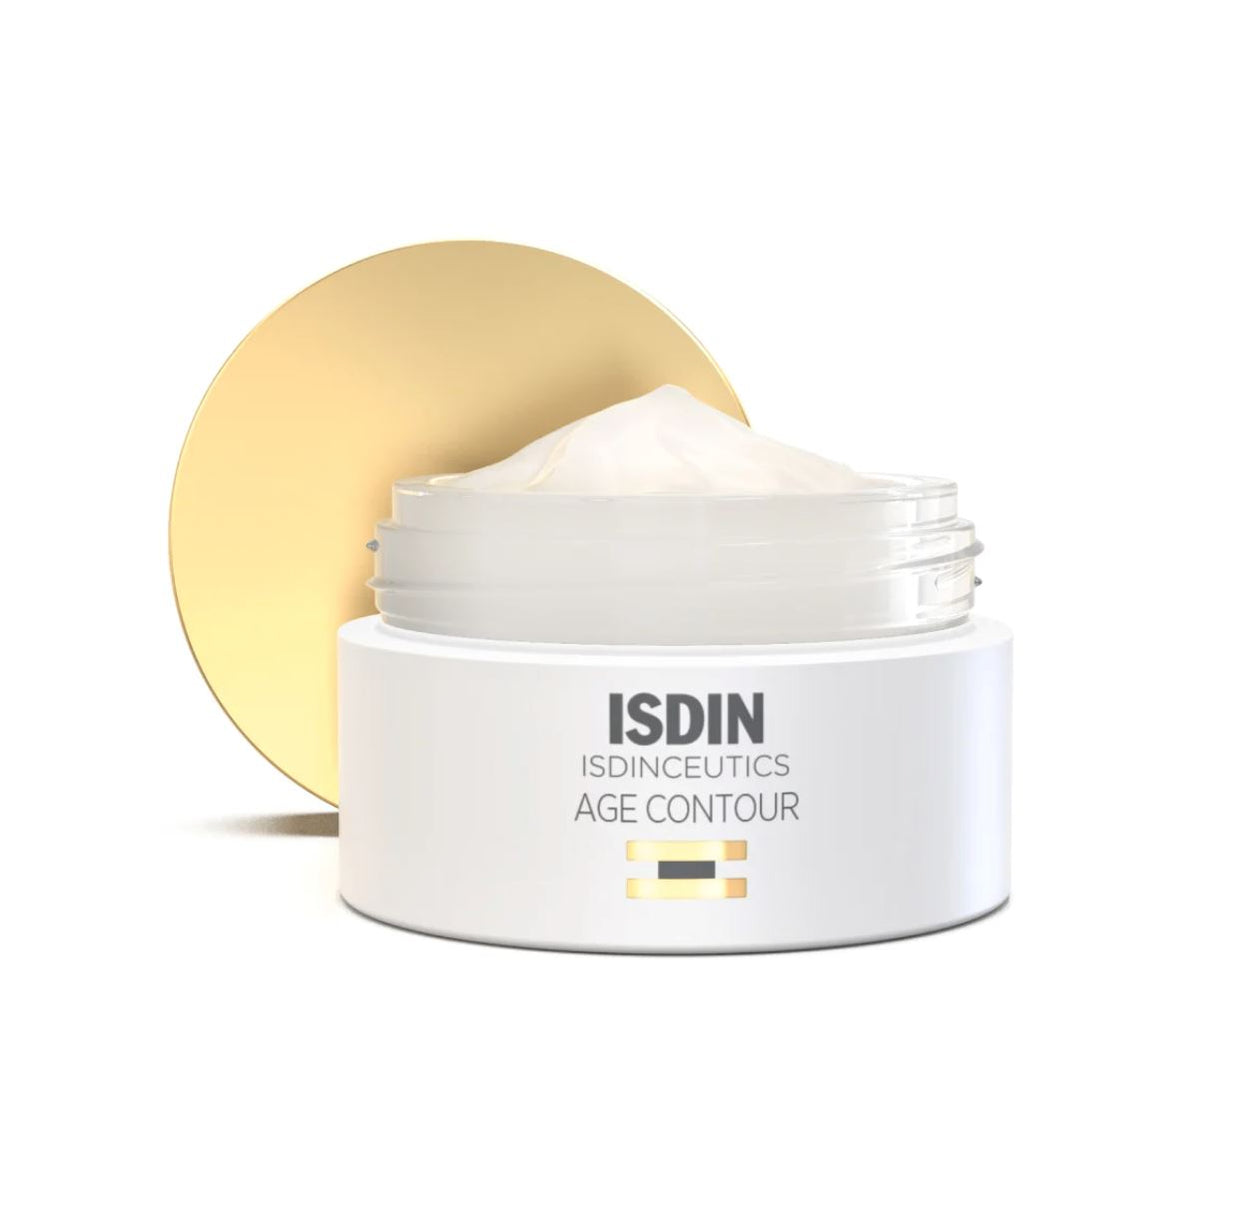 ISDIN Age Contour ISDIN 1.8 fl. oz. Shop at Exclusive Beauty Club